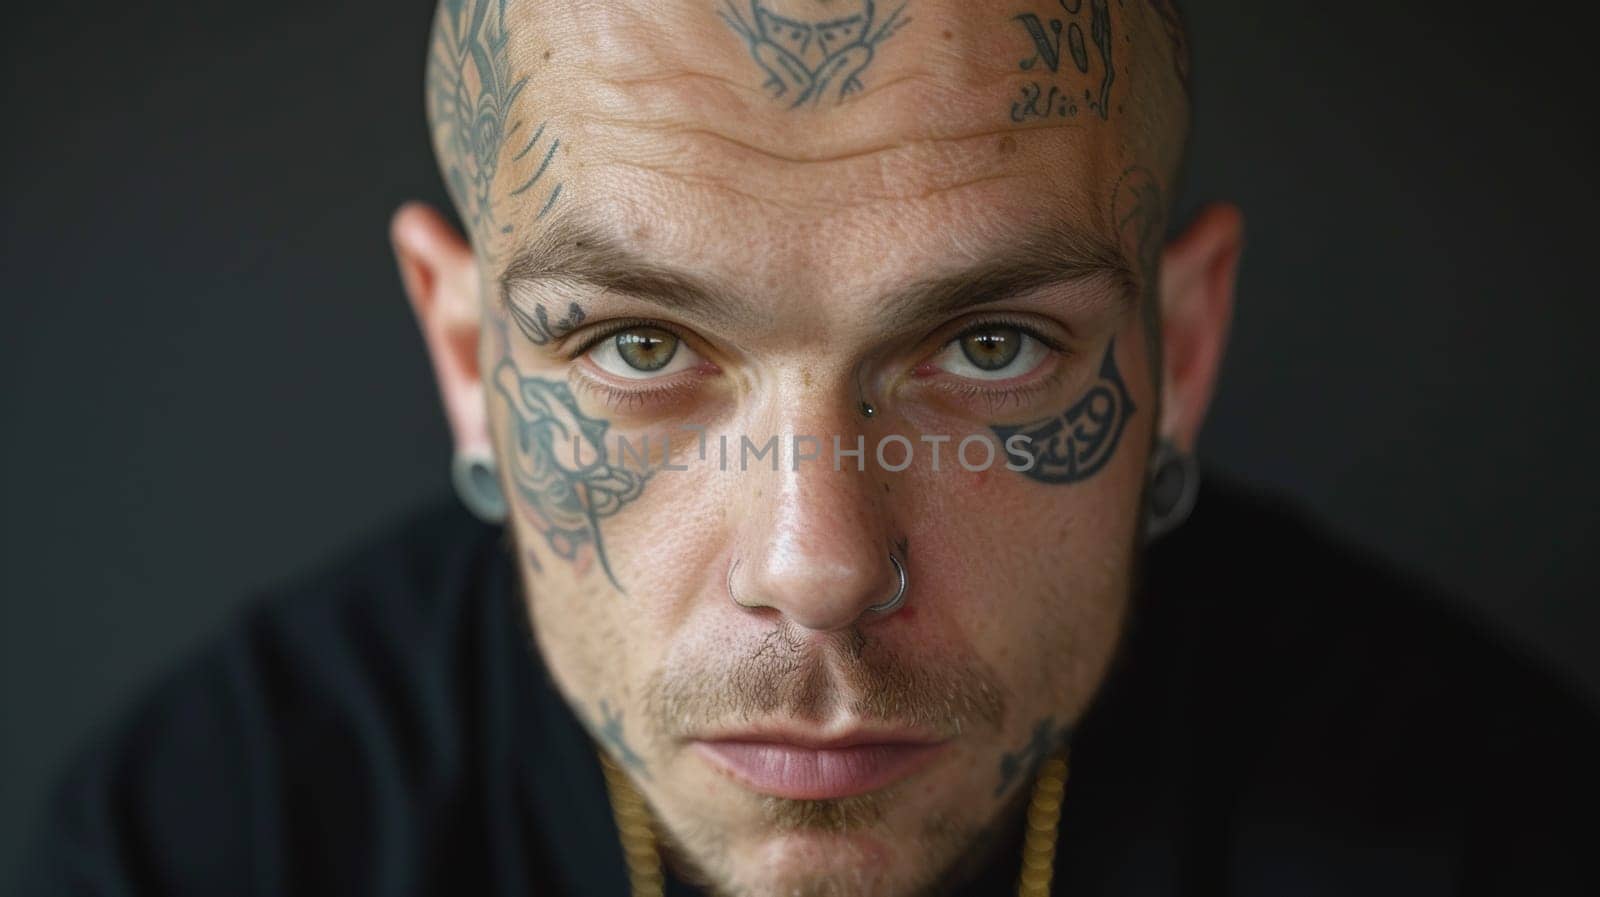 A man with a lot of tattoos on his face and neck